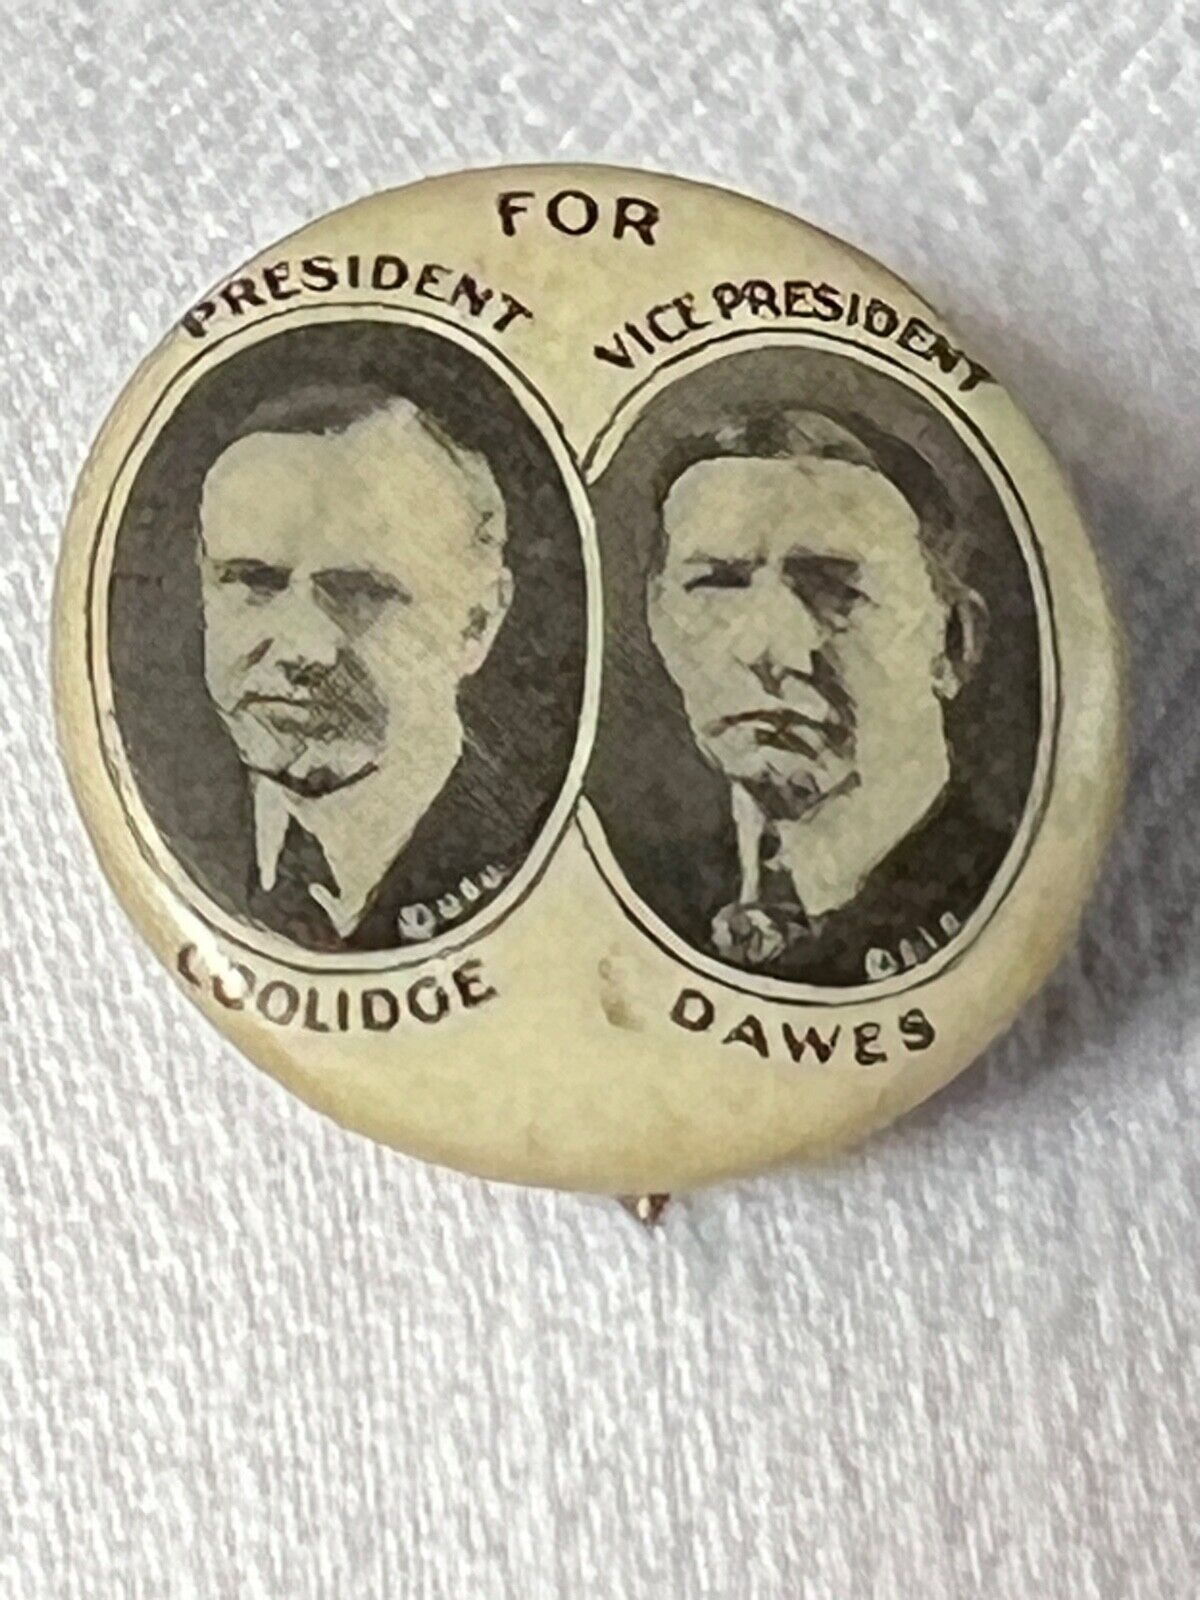 1924 Coolidge Dawes Campaign President Button Pin